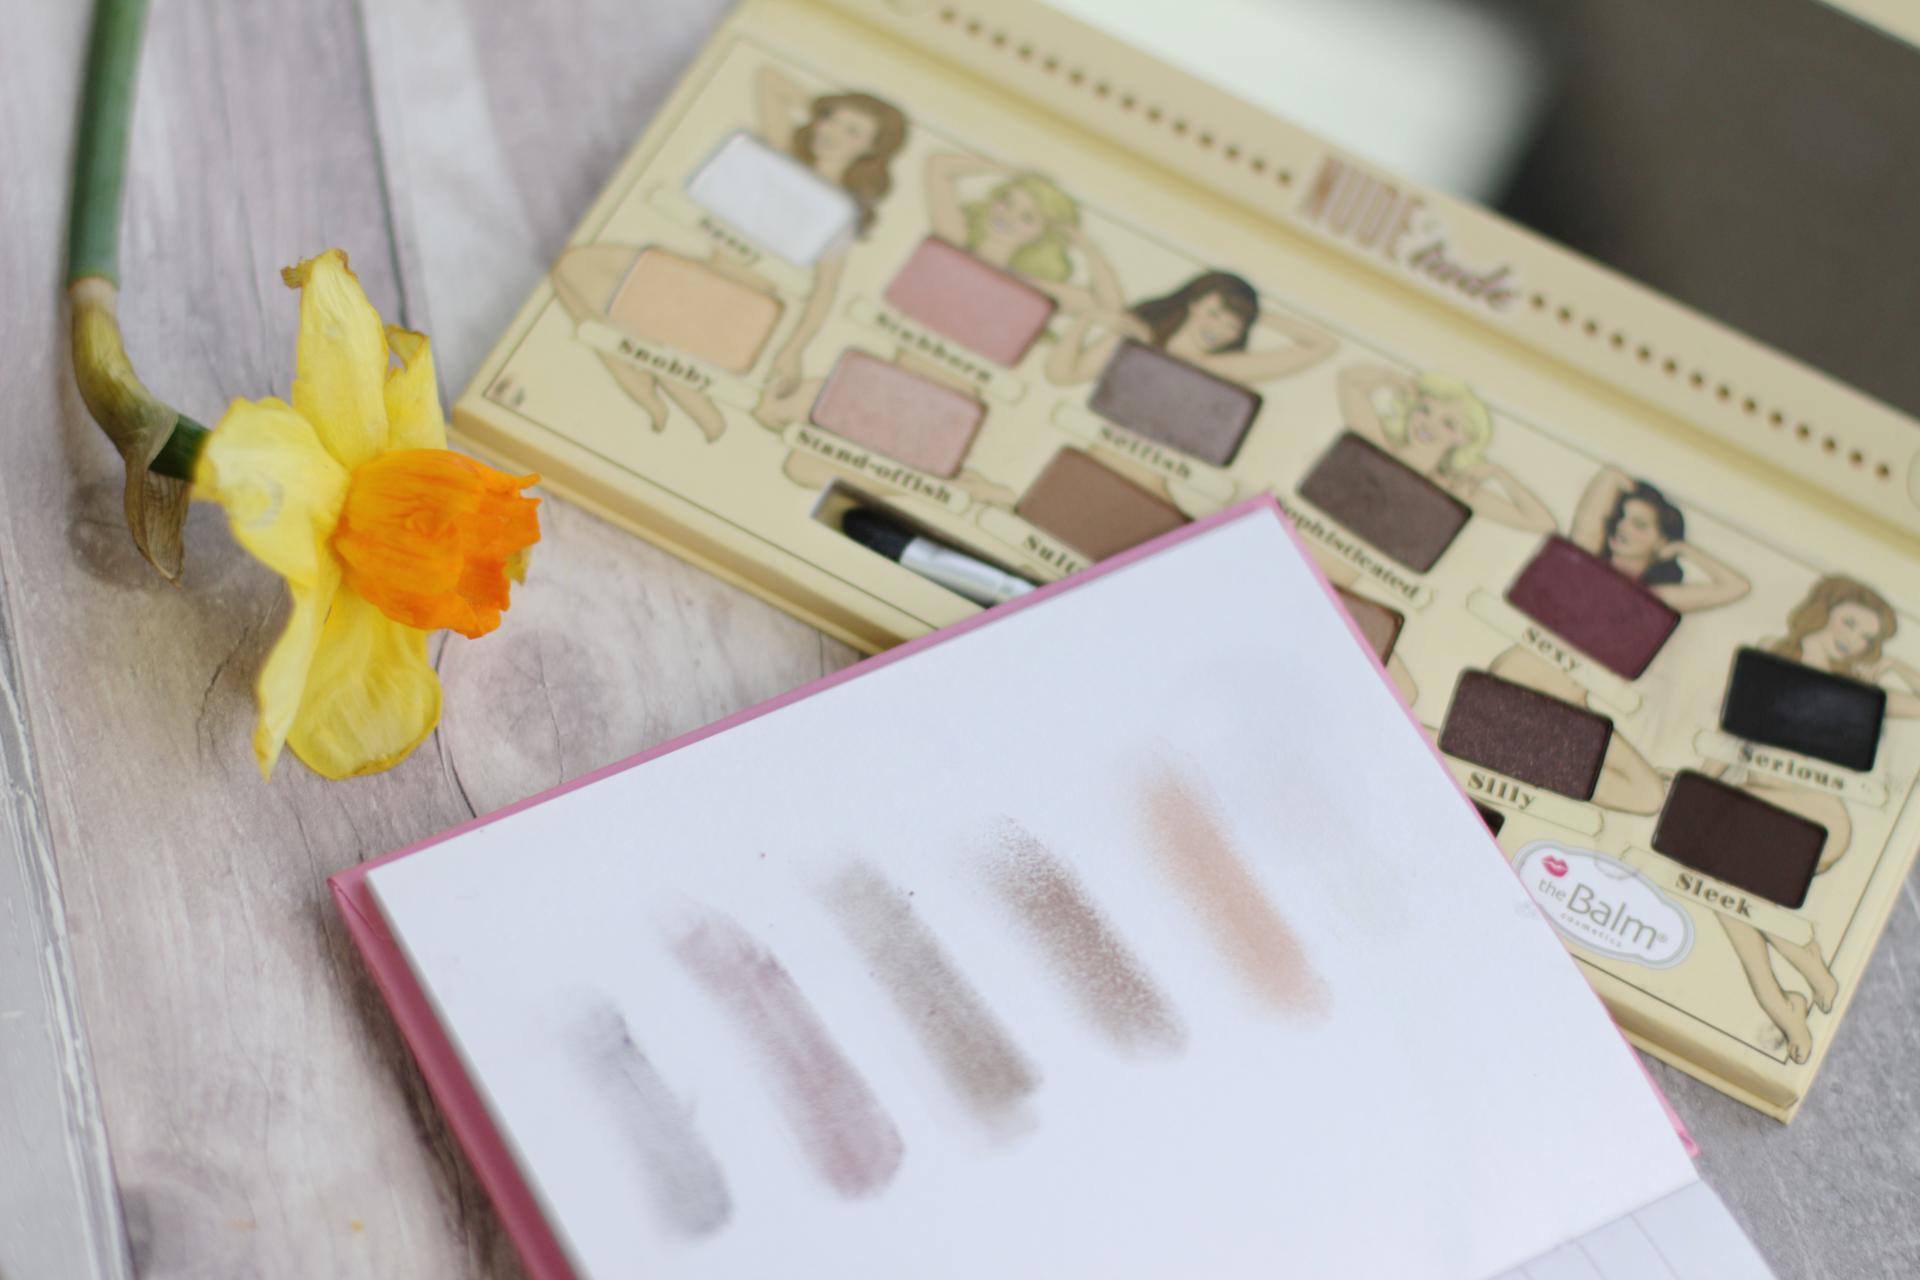 Thebalm Nudetude Eyeshadow Palette Review And Swatches